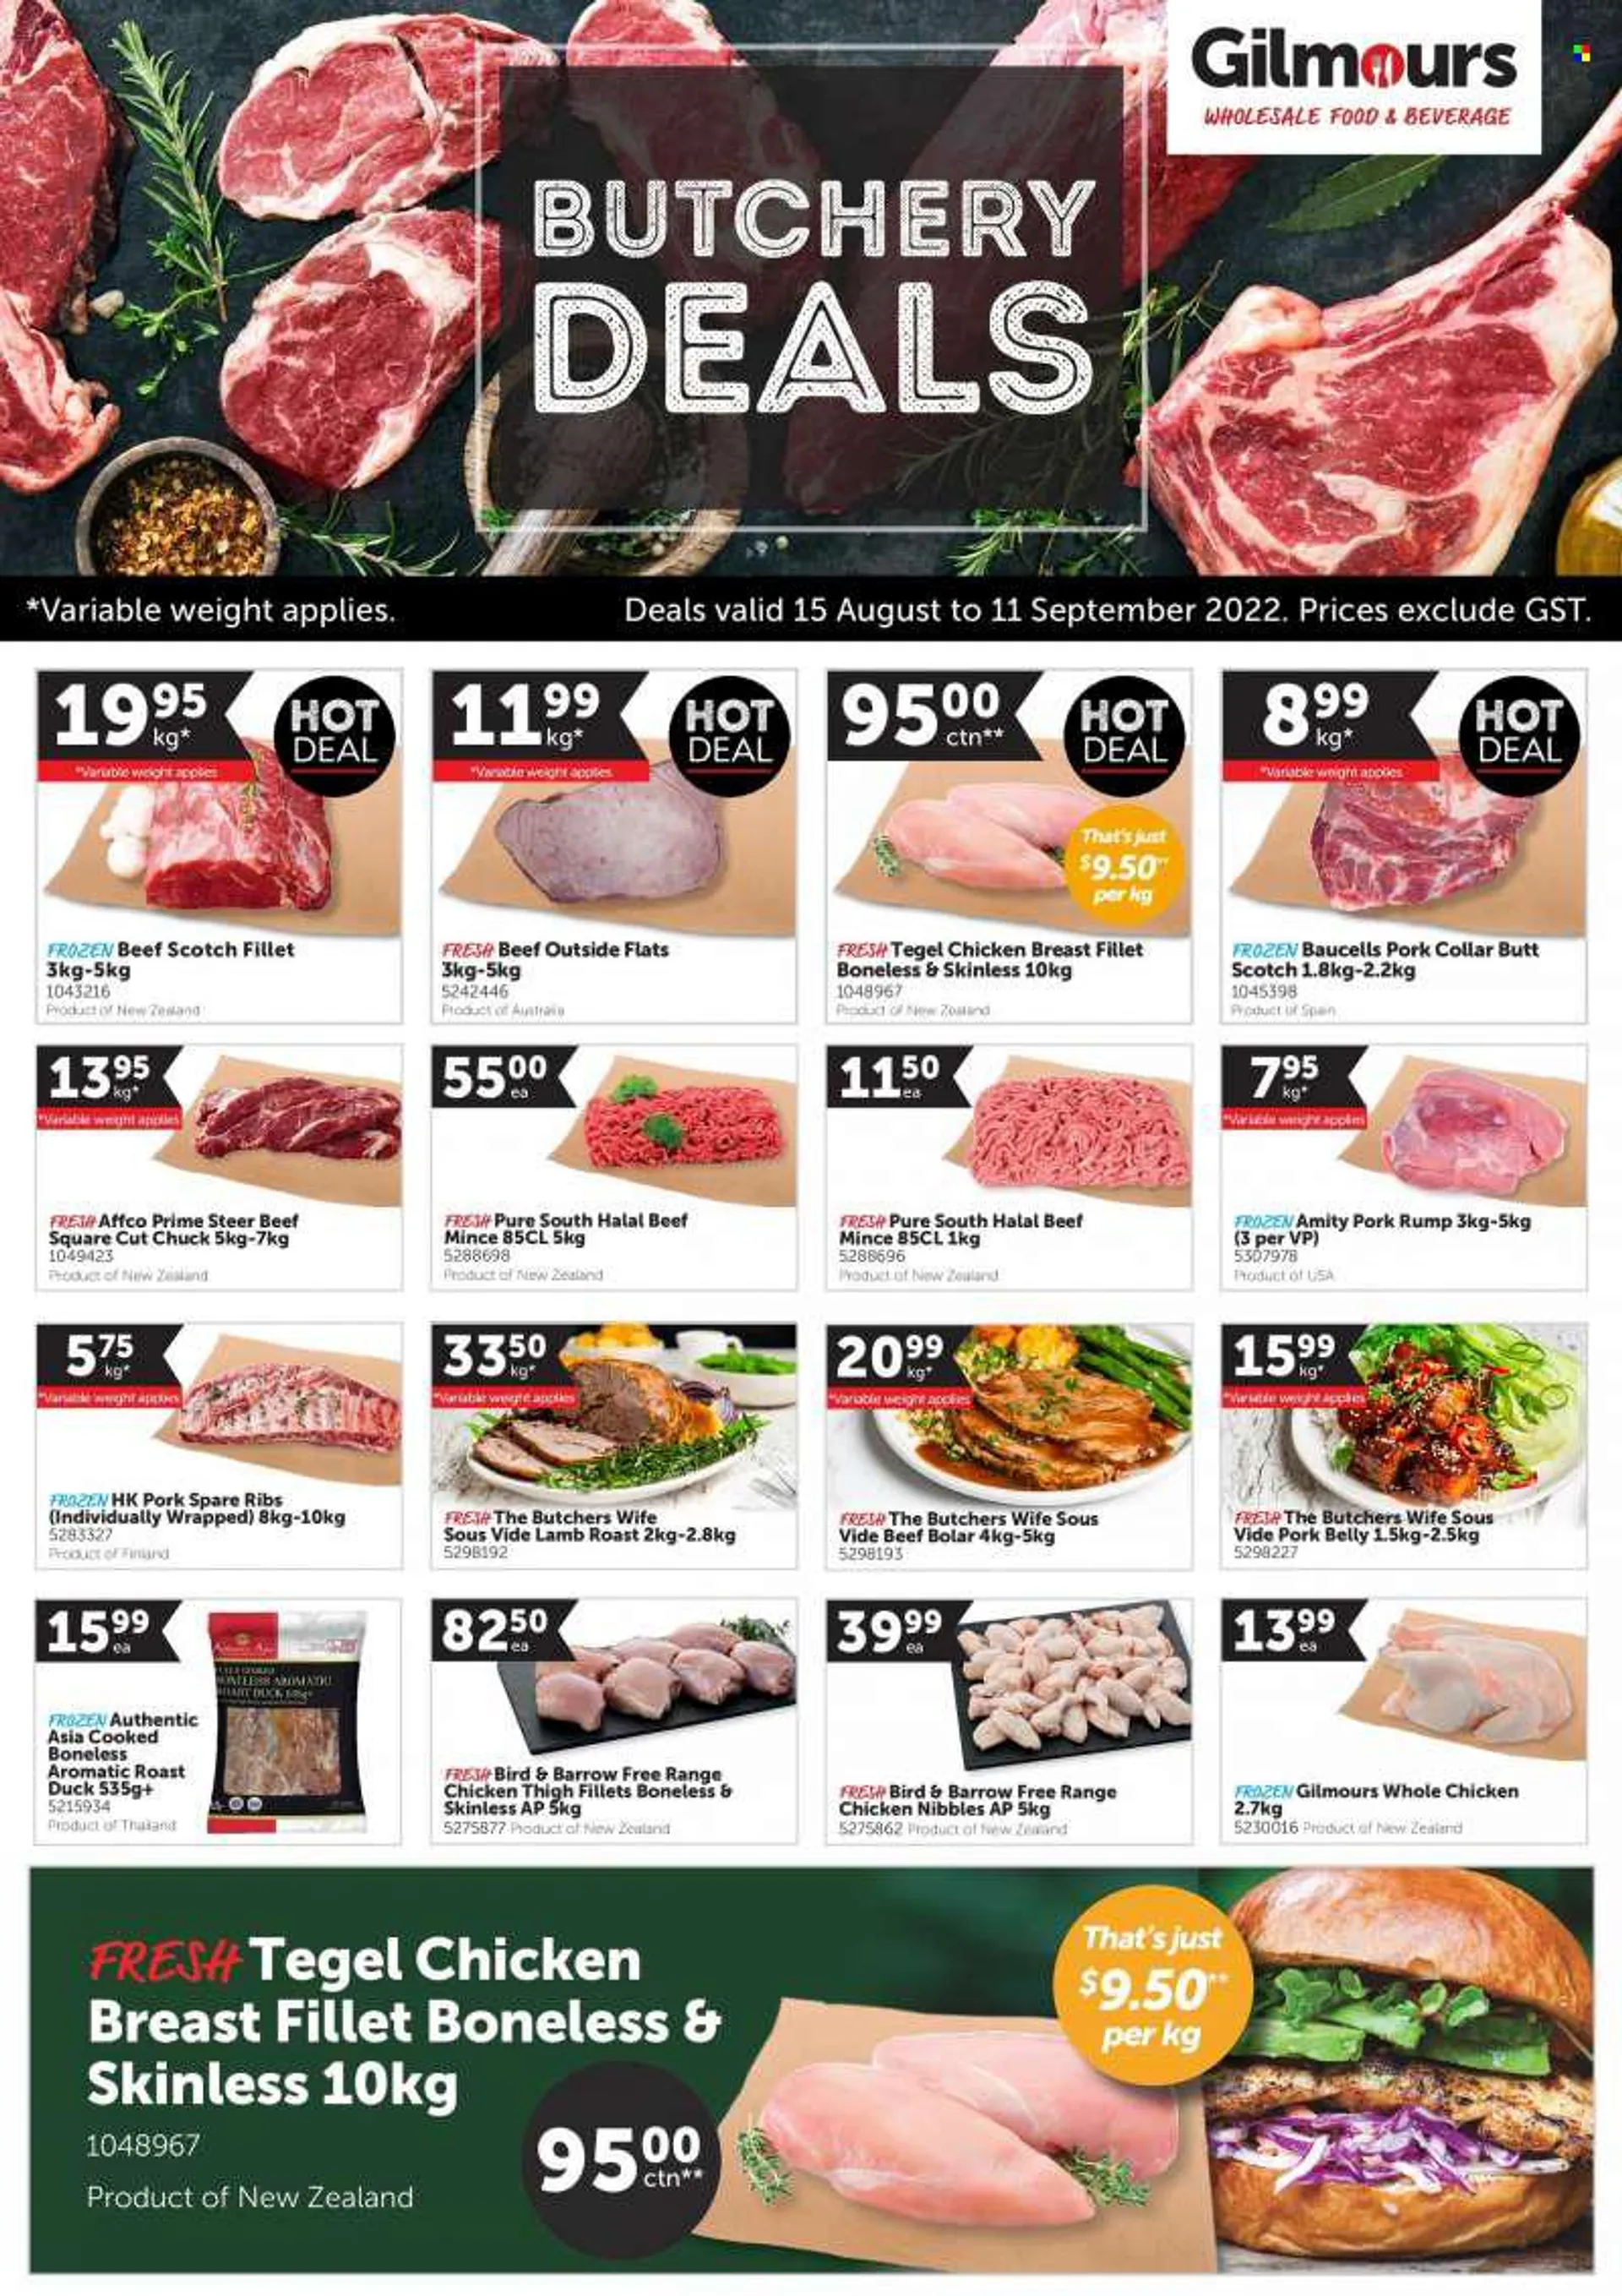 Gilmours mailer - 15.08.2022 - 11.09.2022 - Sales products - whole chicken, chicken breasts, chicken meat, beef meat, ground beef, pork belly, pork meat, pork ribs, pork spare ribs, lamb meat, lamb roast. Page 1.